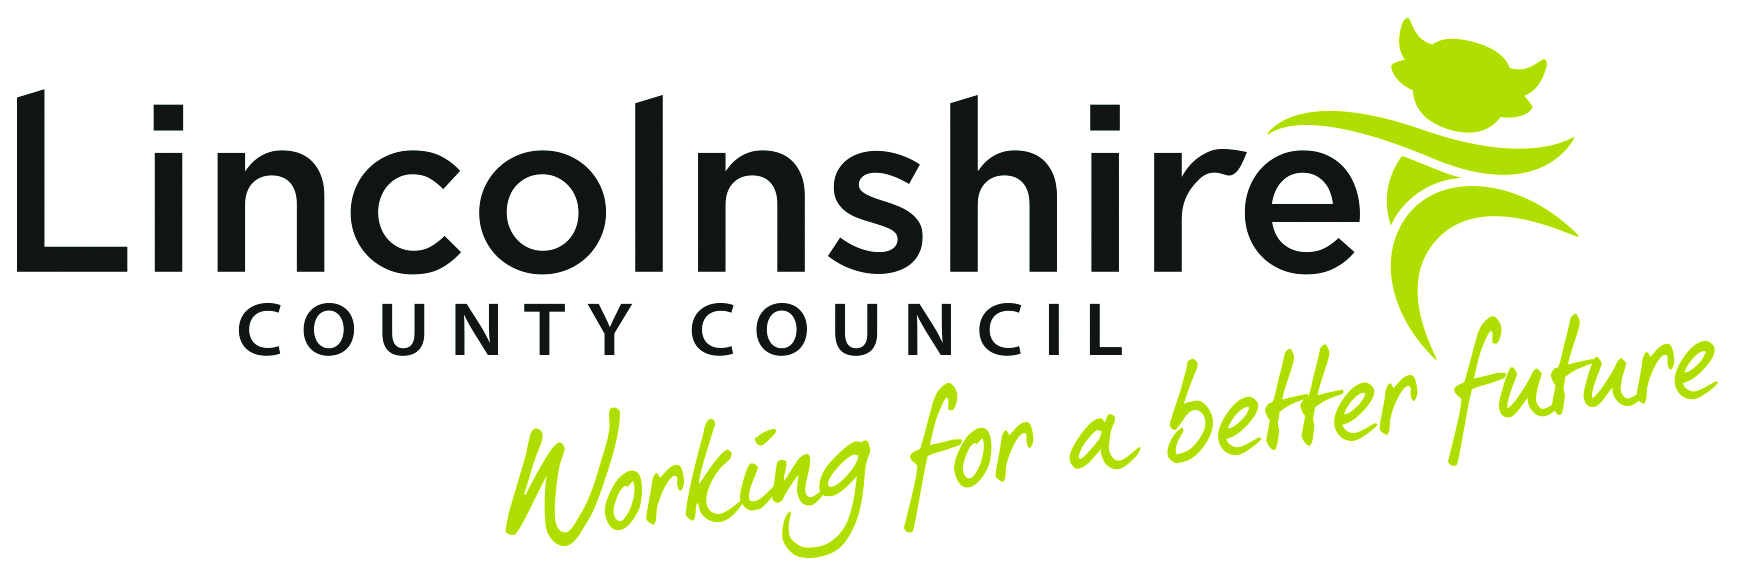 Logo of Lincolnshire County Council